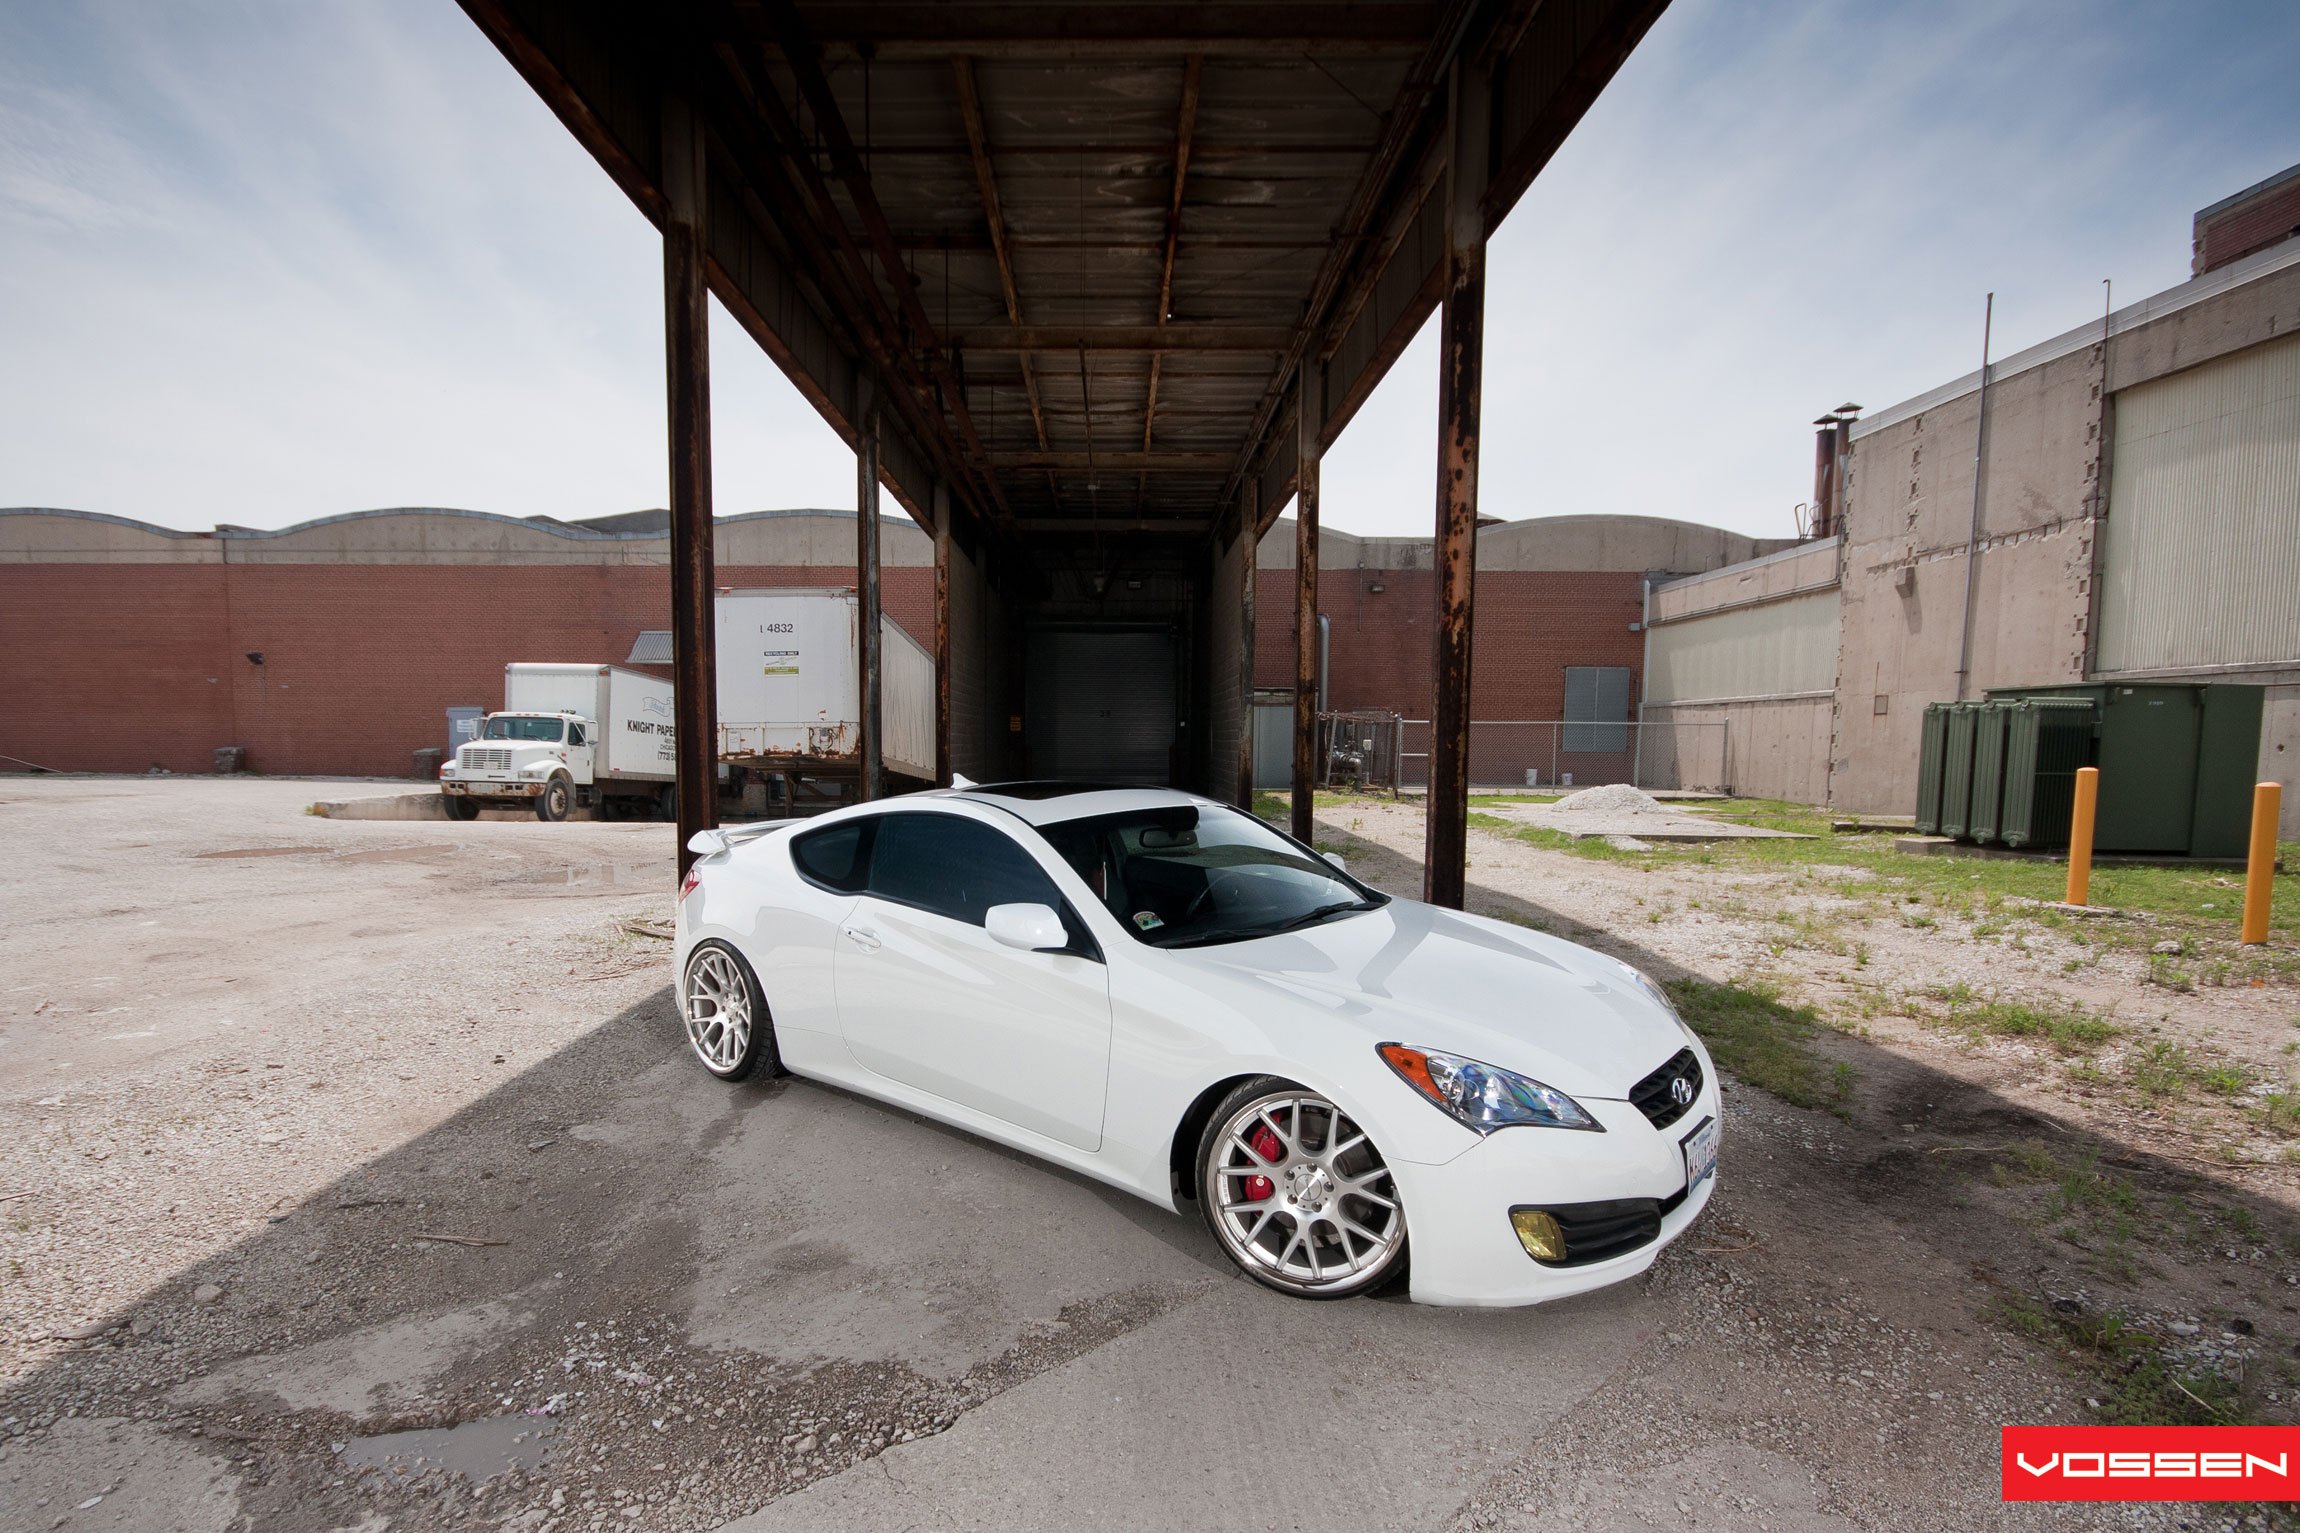 White Hyundai Genesis Coupe with Aftermarket Fog Lights - Photo by Vossen